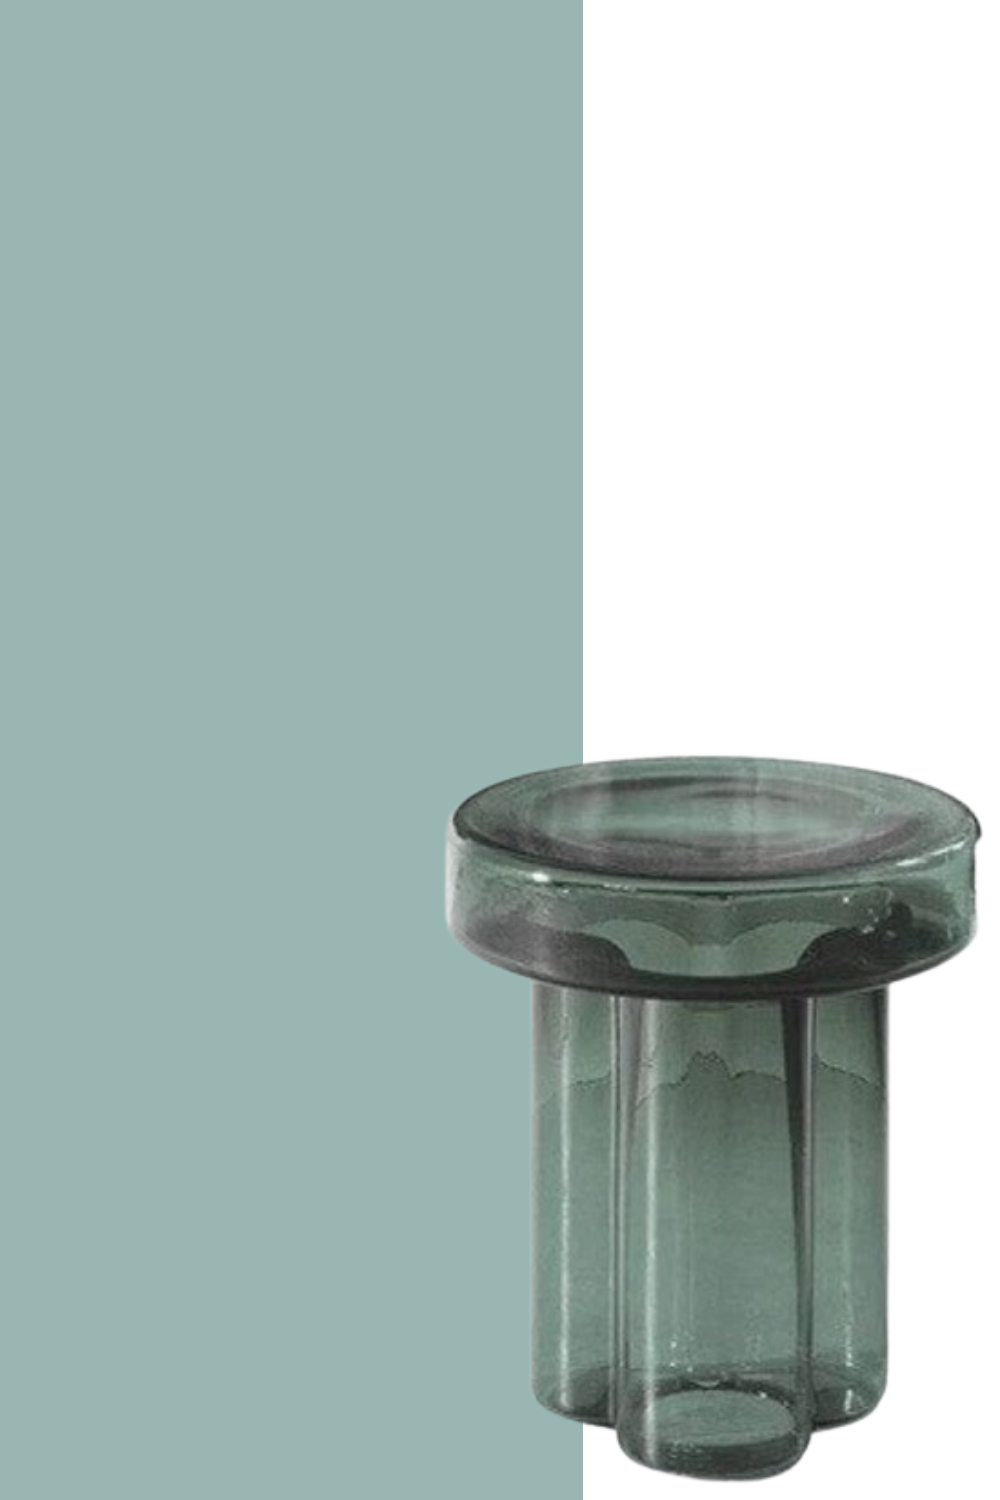 table features a beautifully crafted Murano glass with a gentle texture